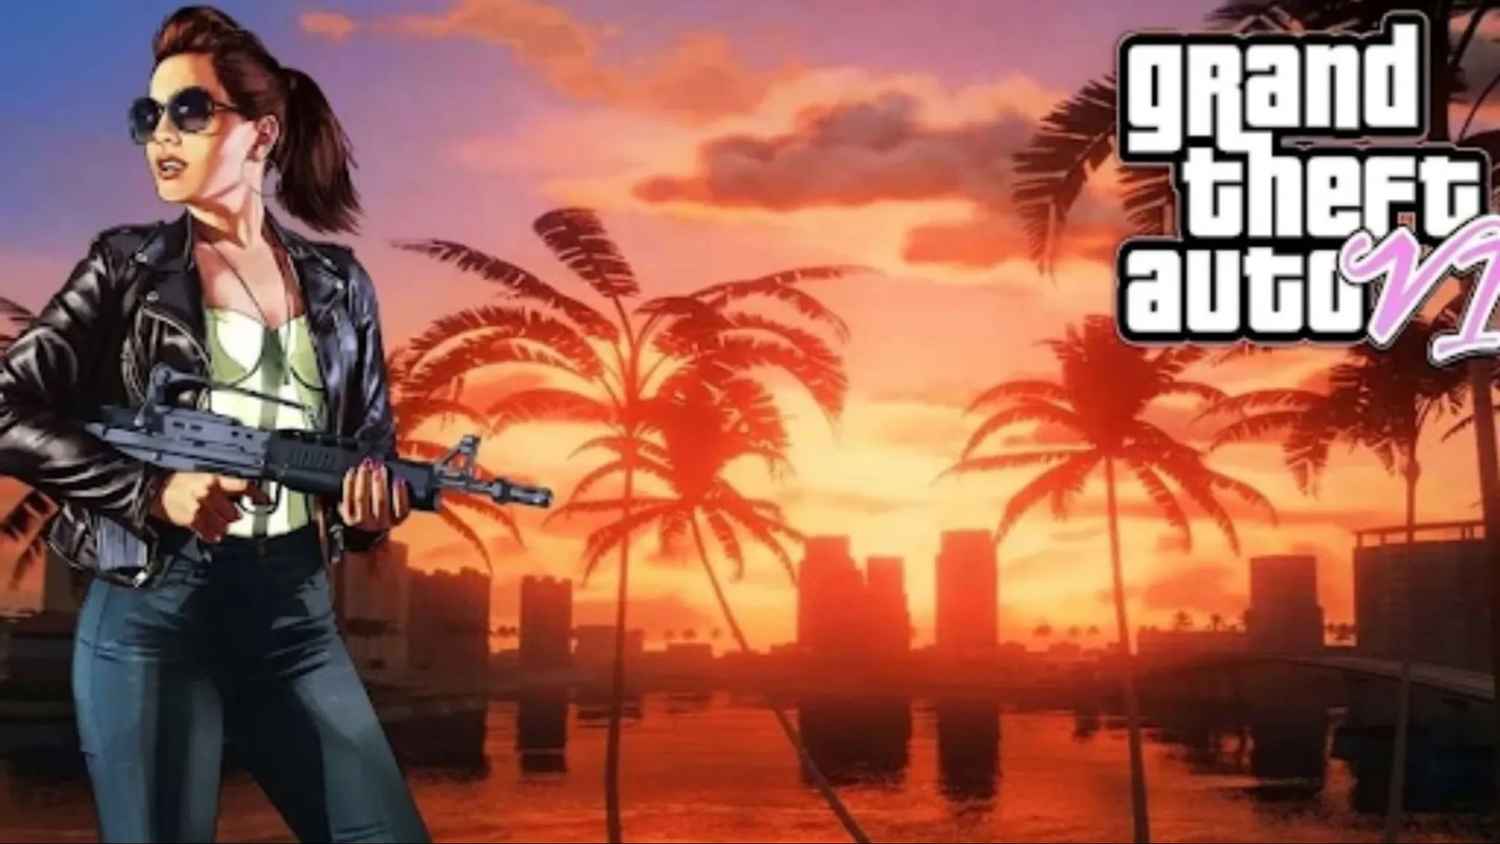 GTA 6 may be unplayable for millions of players, as it won't support older consoles